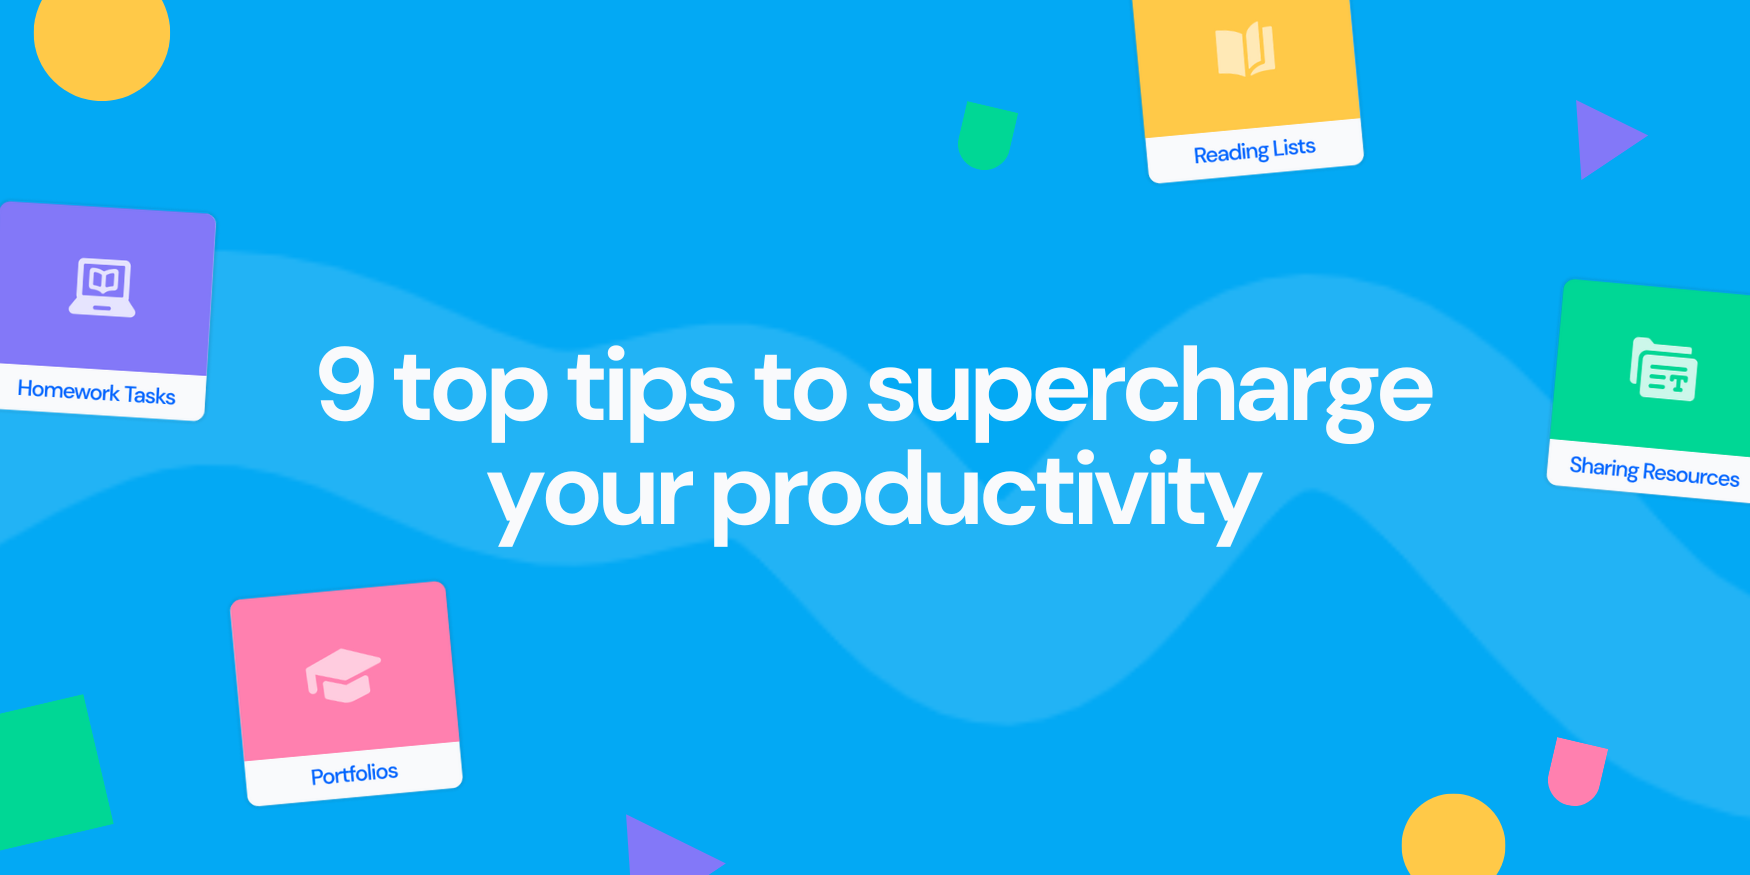 9 top tips to supercharge your productivity